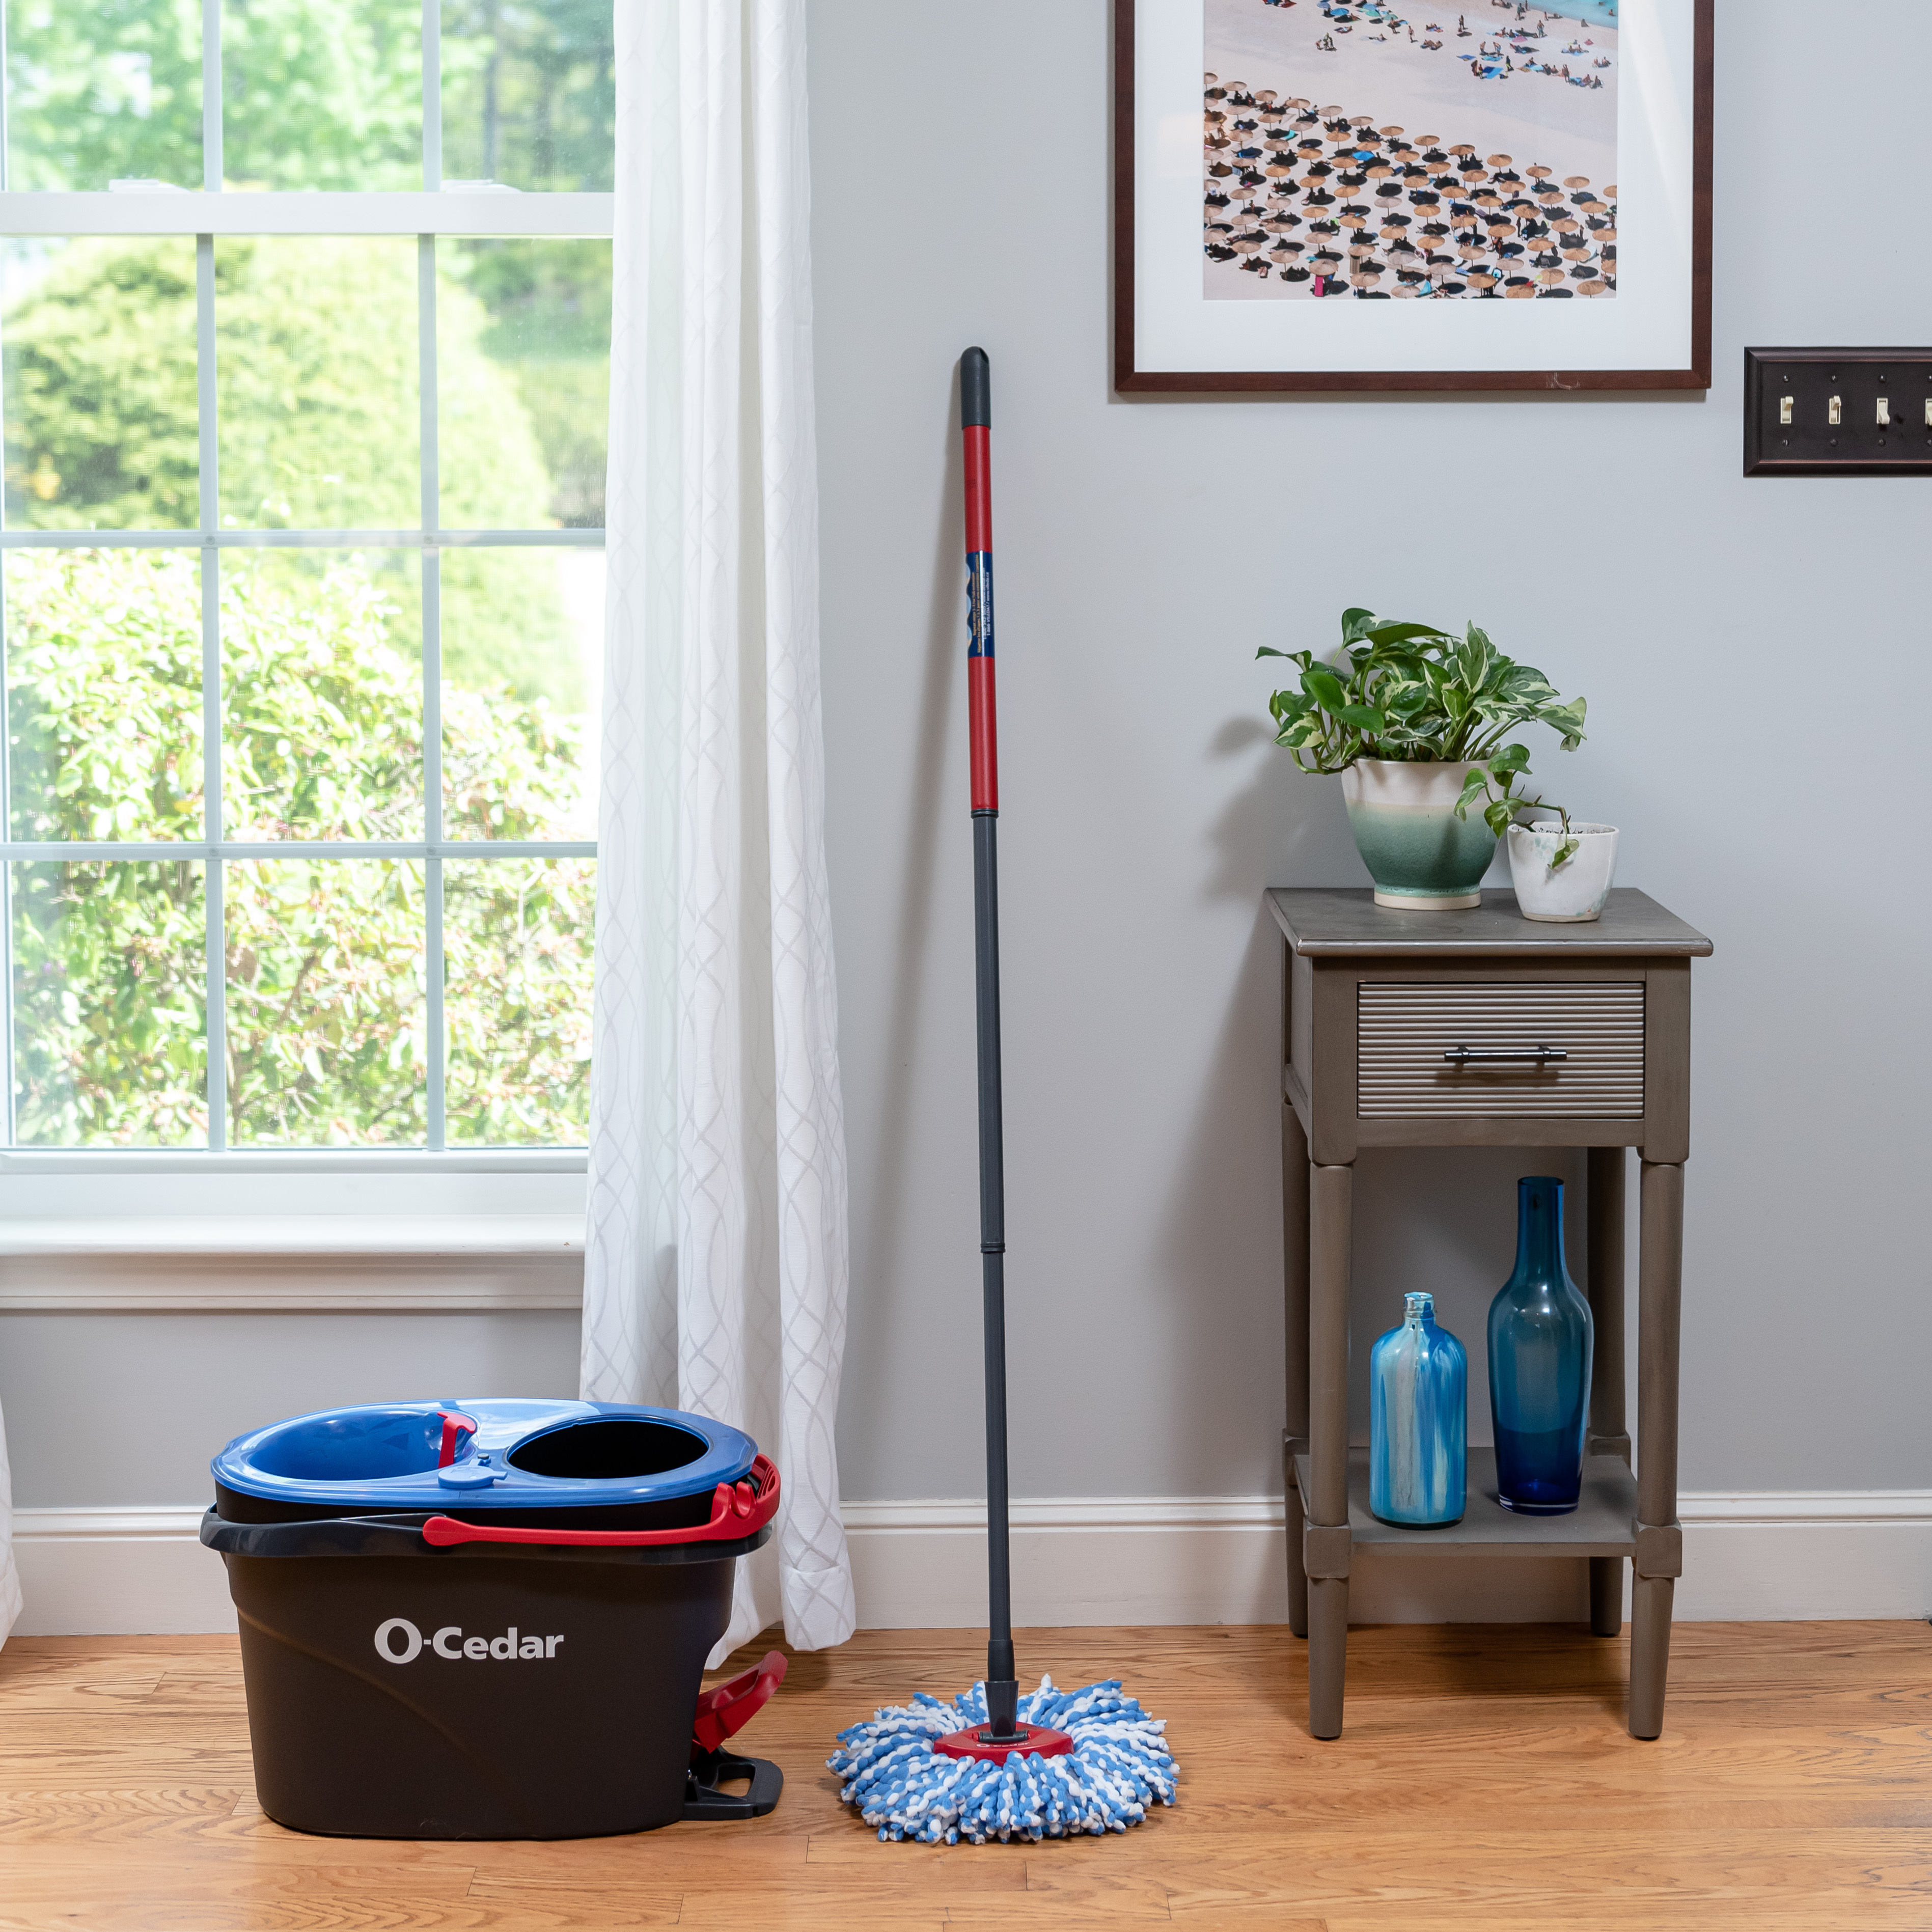 O-Cedar EasyWring RinseClean Spin Mop and Bucket System, Hands-Free System - image 24 of 25